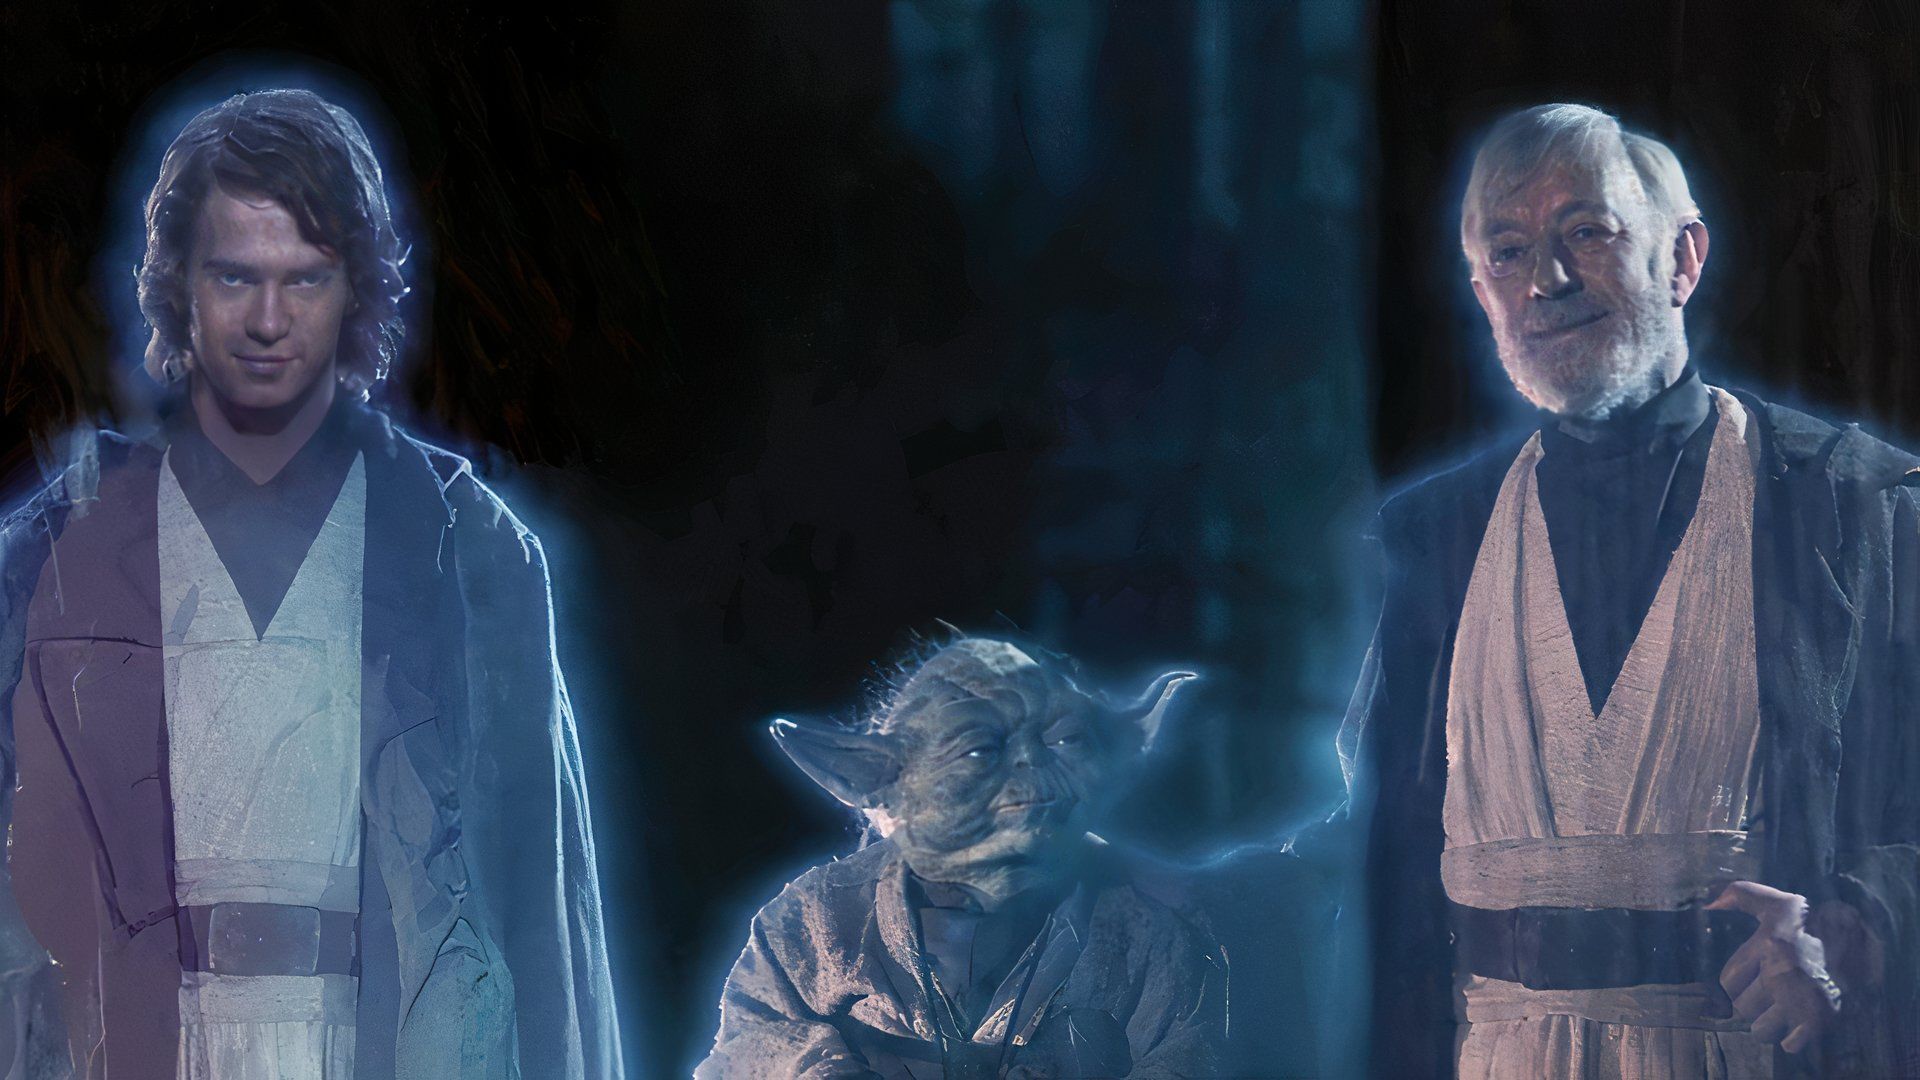 Force ghosts in Return of the Jedi with Anakin, Yoda, and Obi-Wan